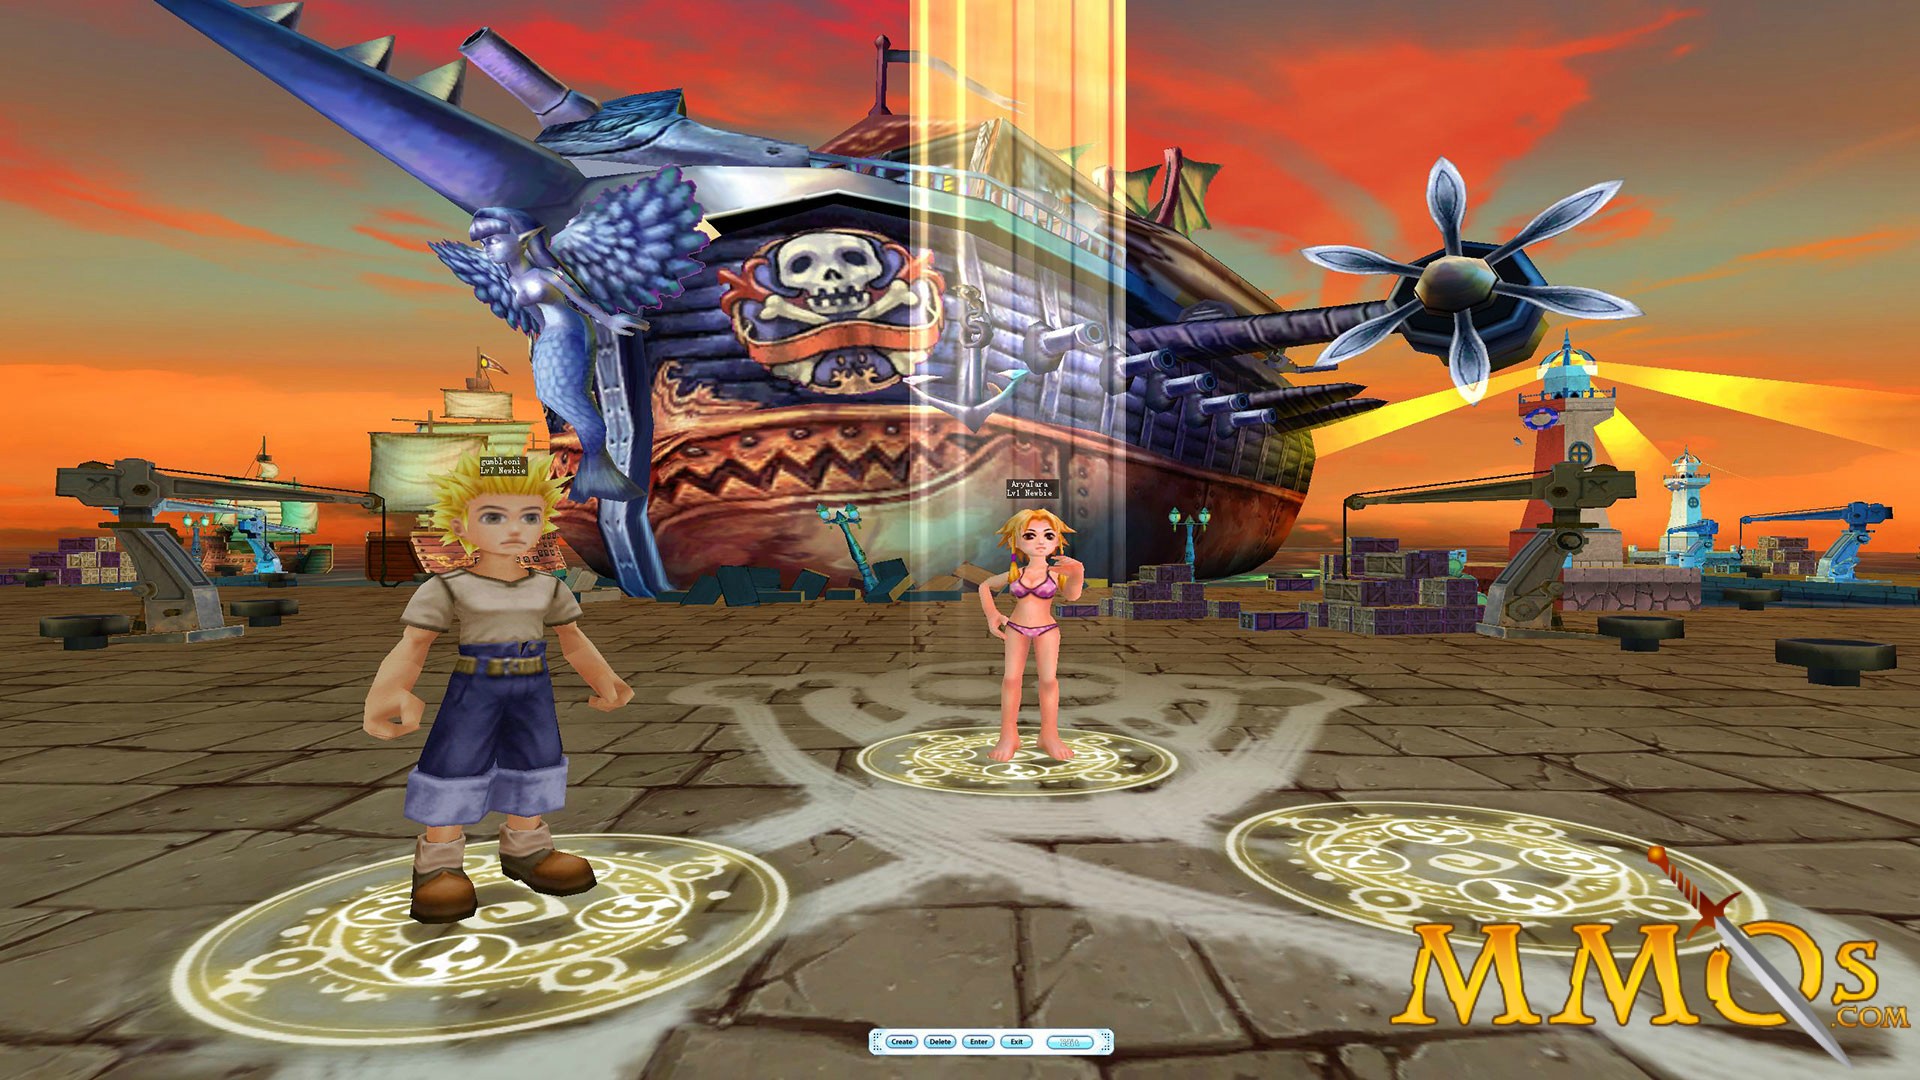 Image 6 - pirate king online - IndieDB